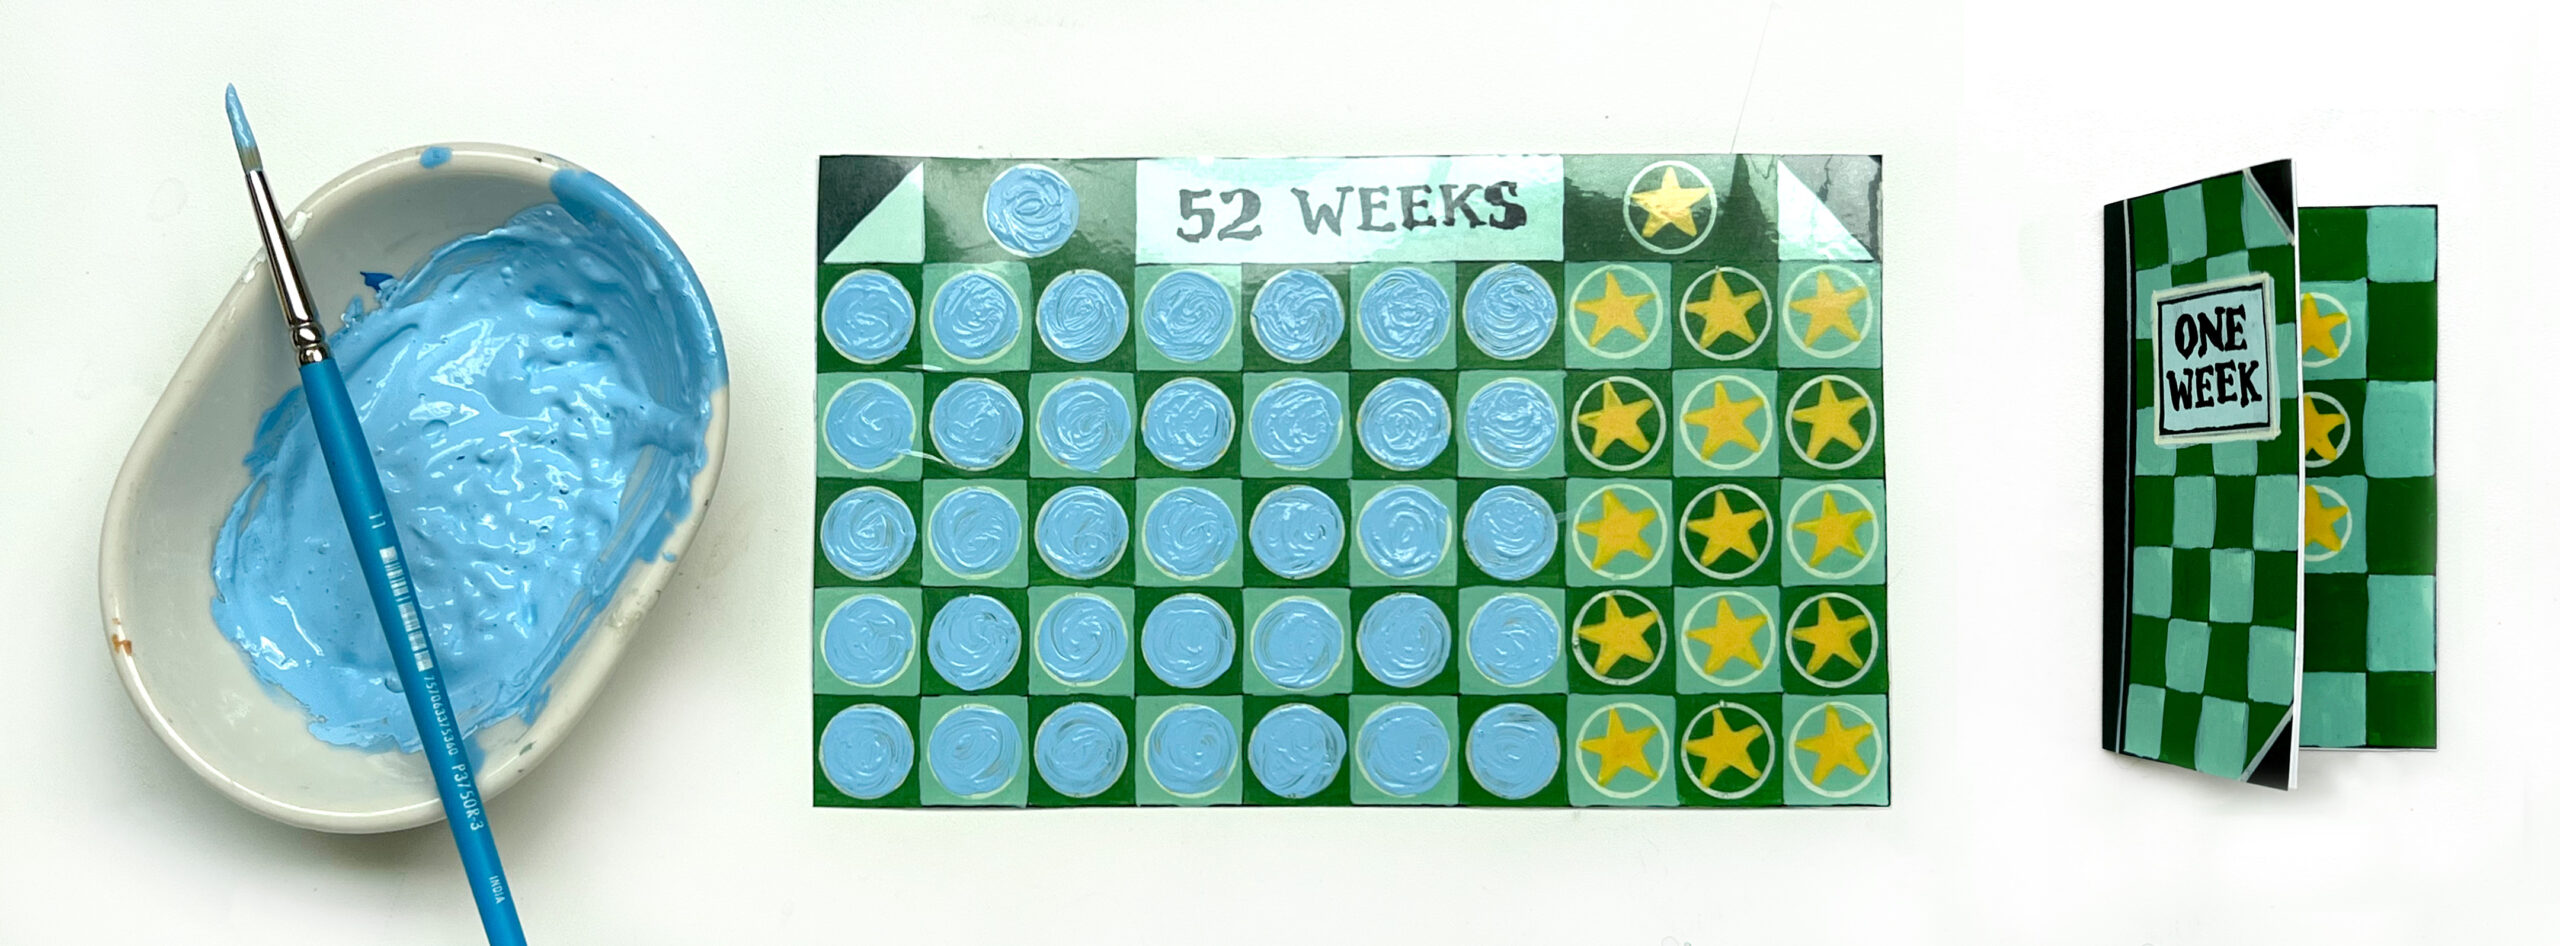 image of a dish of light blue paint and paint brush on the left and two pieces of printable art with green grids representing weeks of the year to make a scratcher card